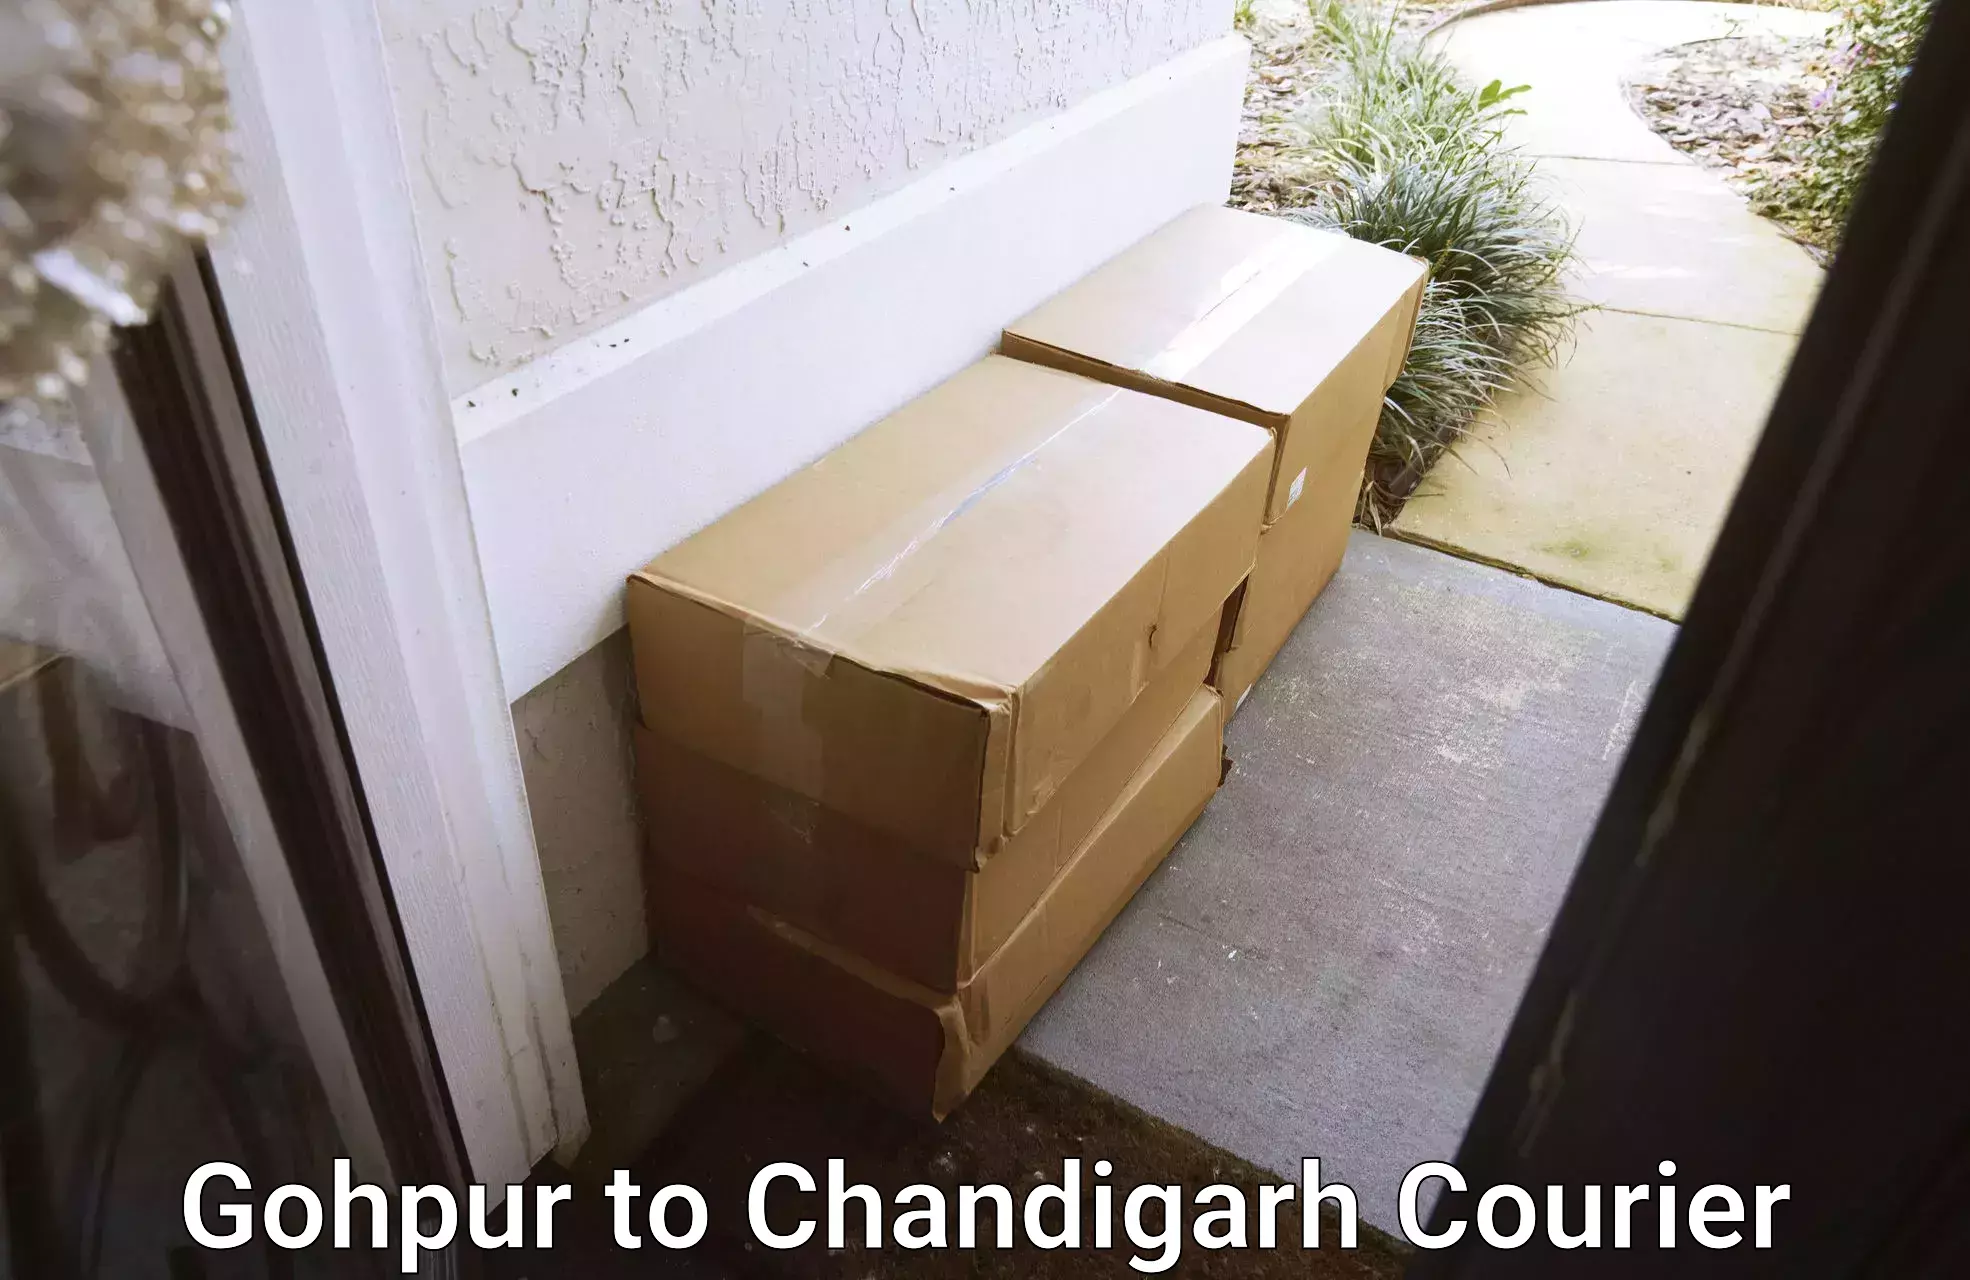 Delivery service partnership Gohpur to Chandigarh